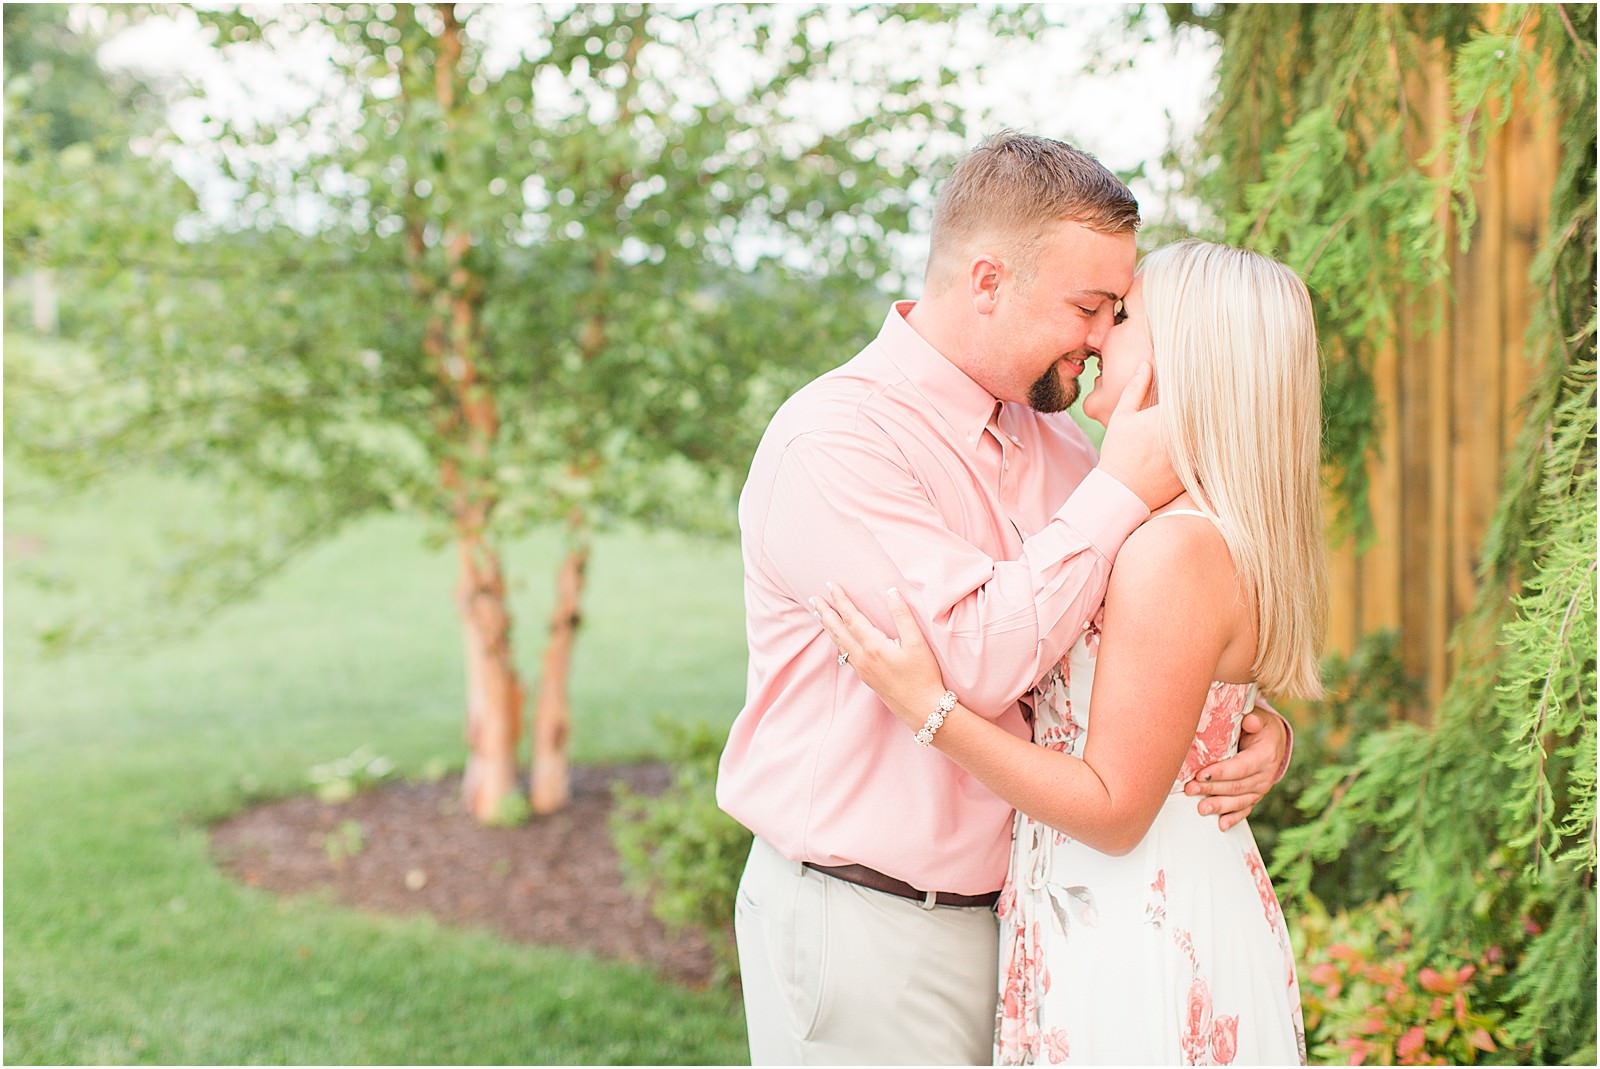 Lauren and Bryce | The Corner House B&ed and Breakfast Engagement Session | Bret and Brandie Photography 017.jpg